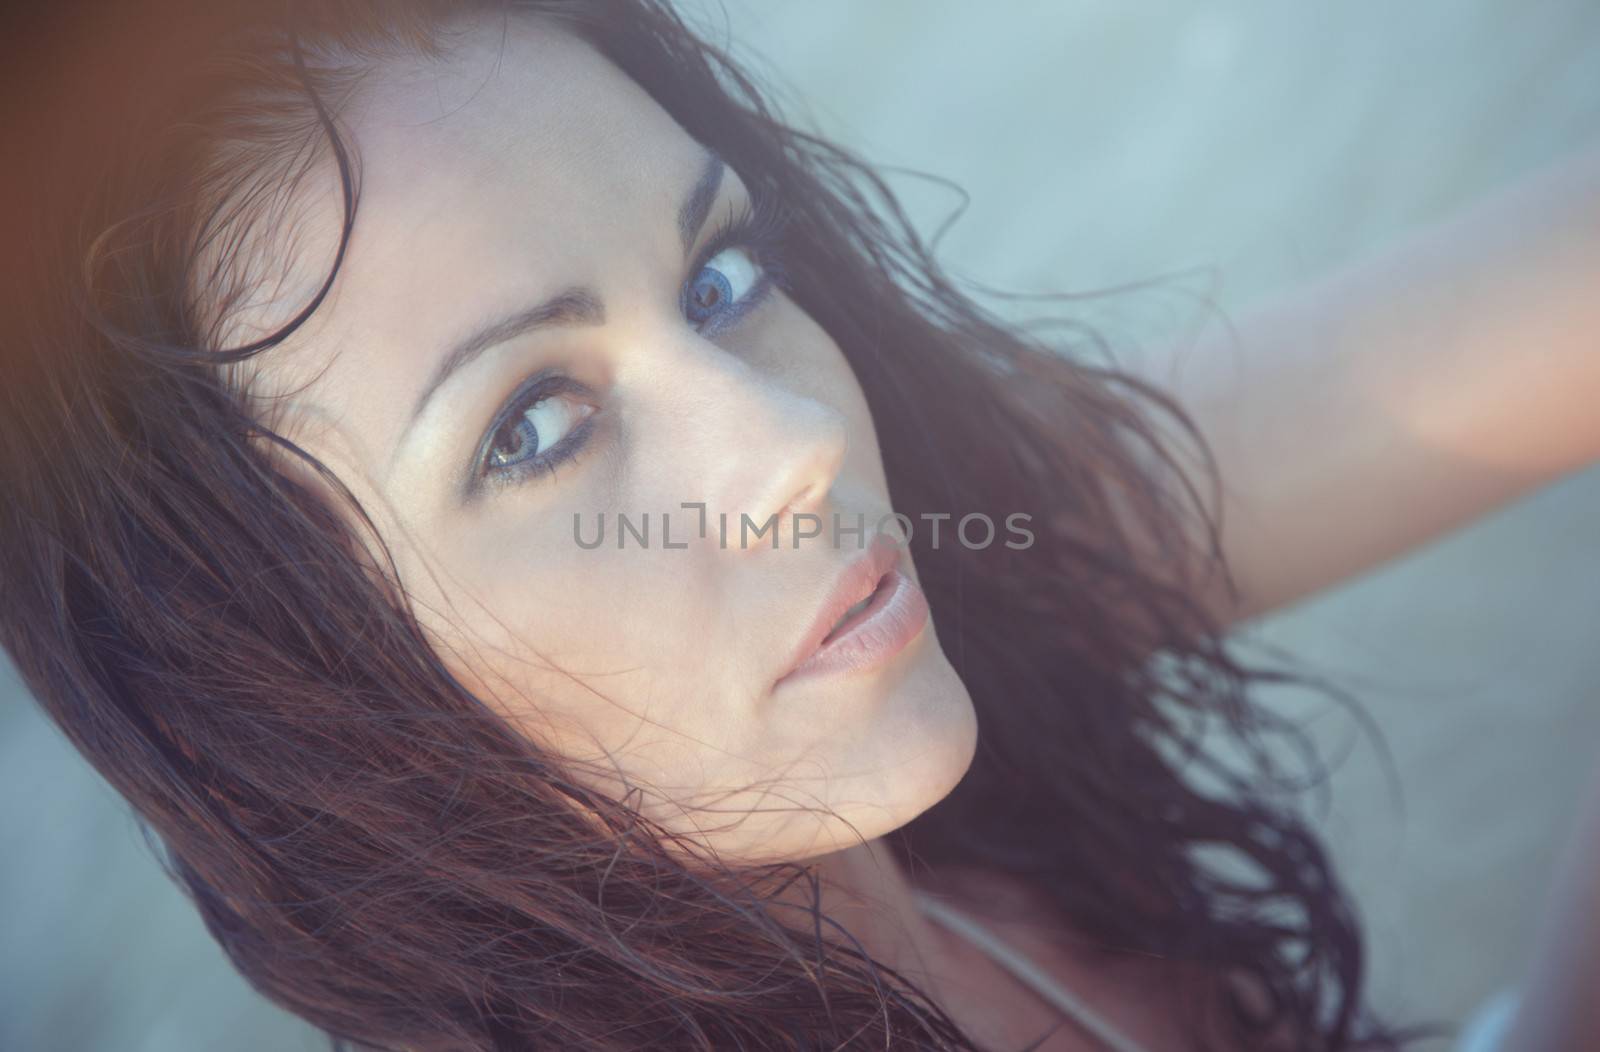 Pensive woman with wet hairs in the water. Natural light and colors